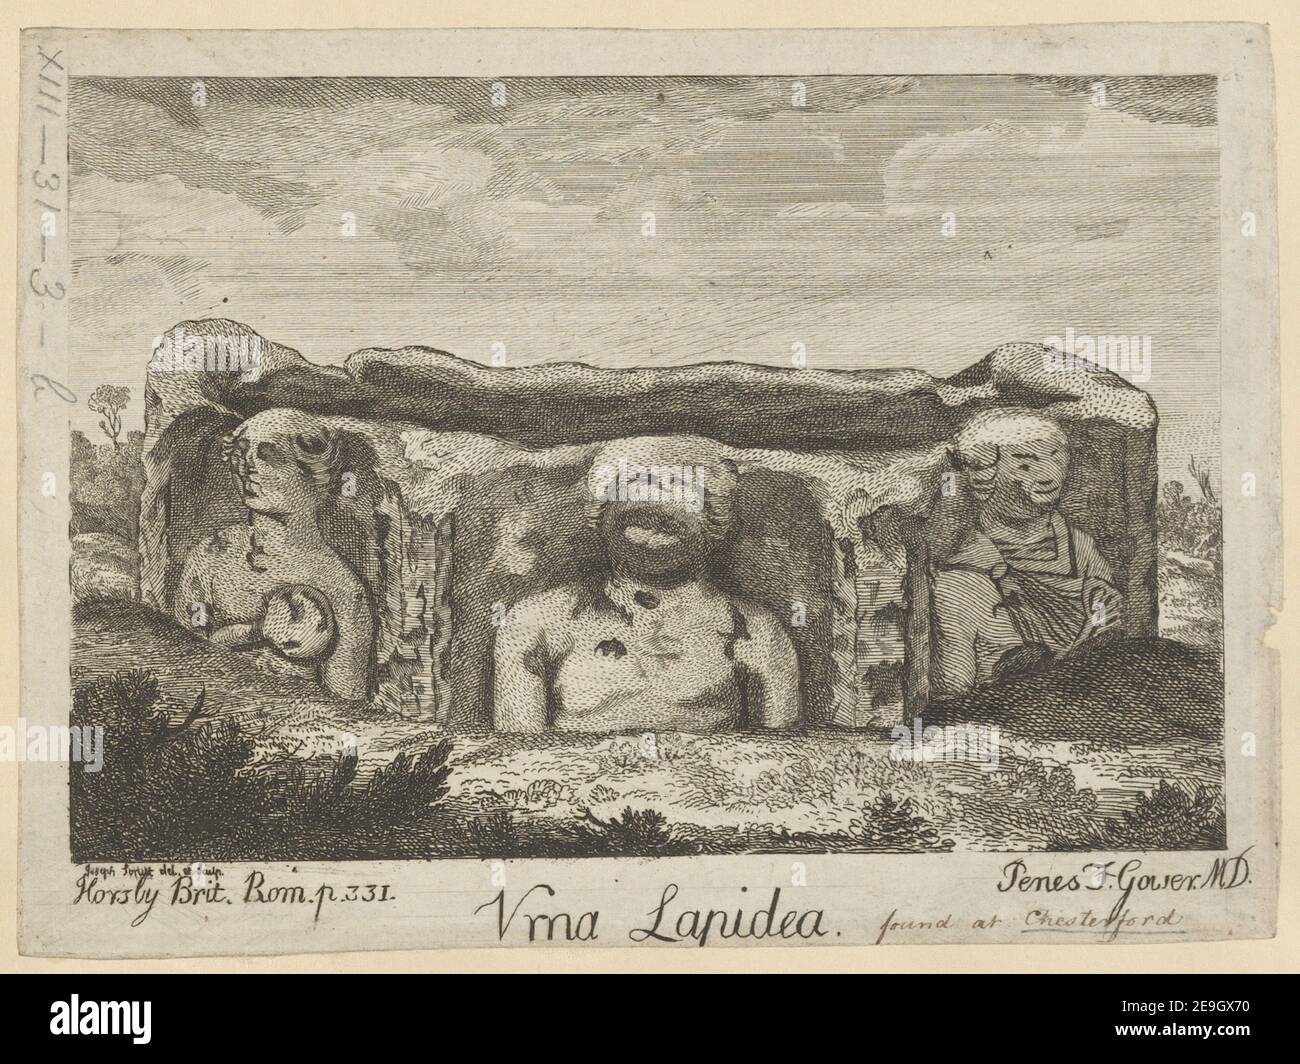 Vrna Lapidea.  Author  Strutt, Joseph 13.31.3.b. Place of publication: [London] Publisher: [unpublished]., Date of publication: [1771 c.]  Item type: 1 print Medium: etching Dimensions: sheet 15.7 x 21.5 cm [trimmed within platemark]  Former owner: George III, King of Great Britain, 1738-1820 Stock Photo